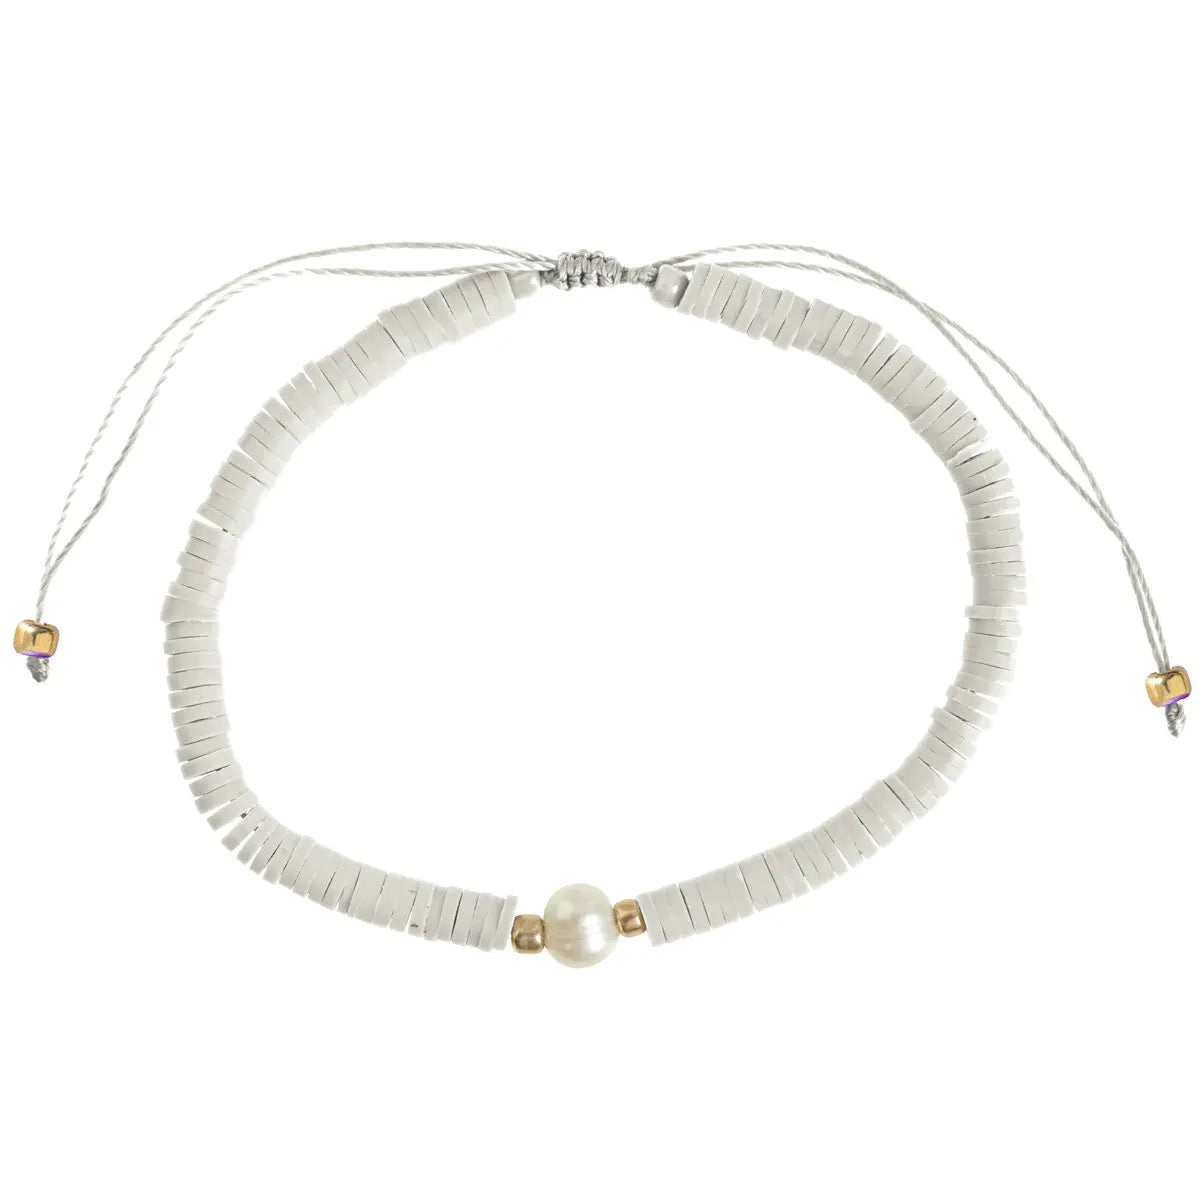 Beach Beads with Pearl Bracelet - White